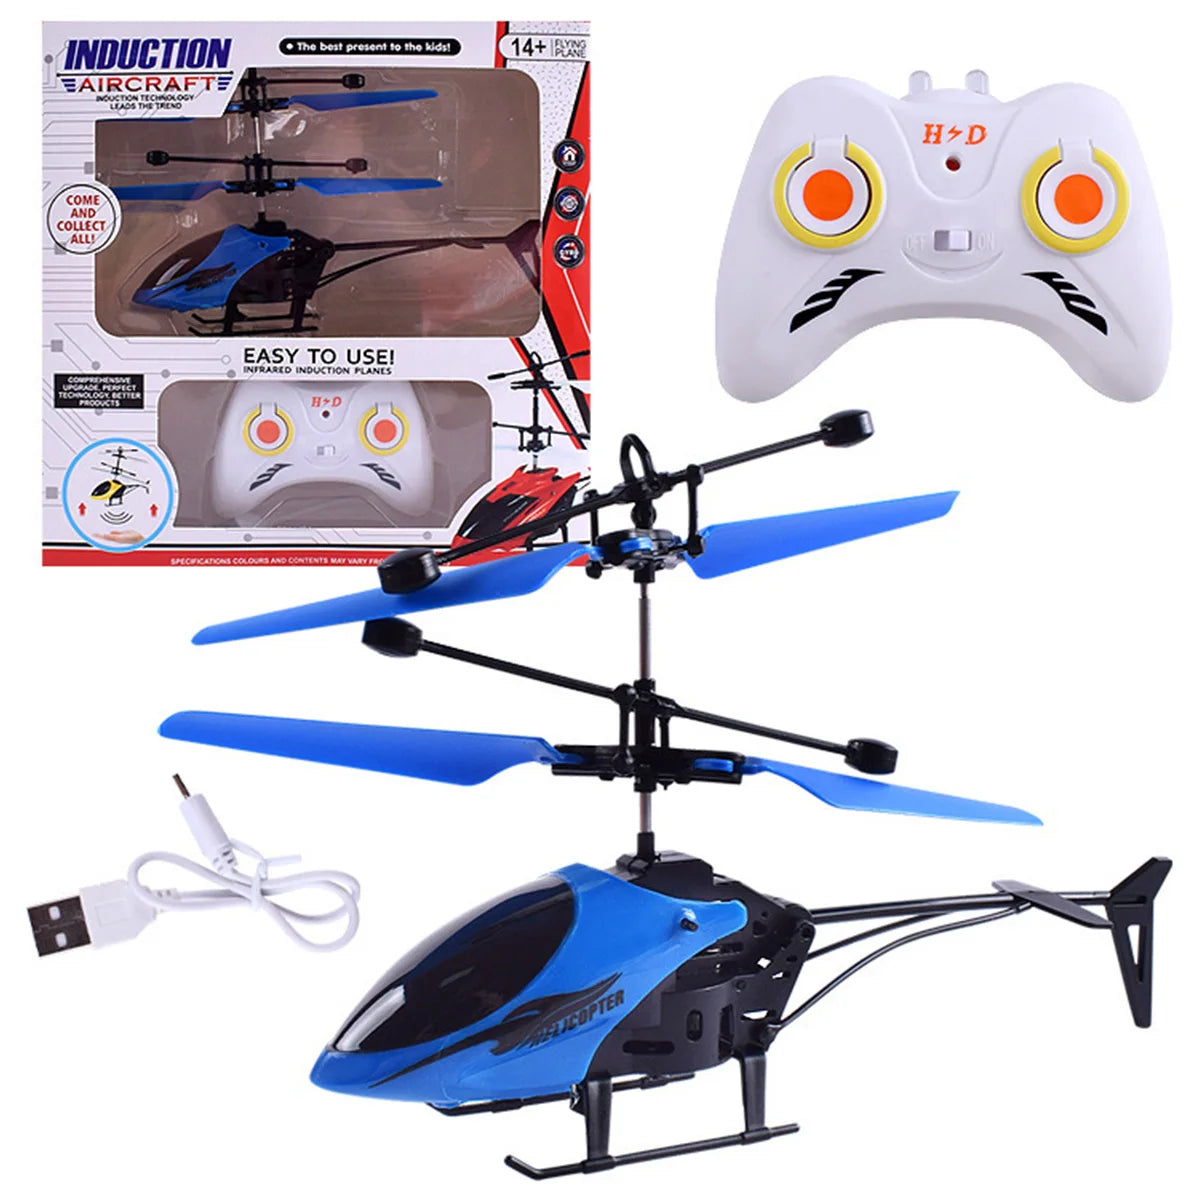 CY-38 Rc Helicopter, if you have more than one kid, give them a fly ball, they will have